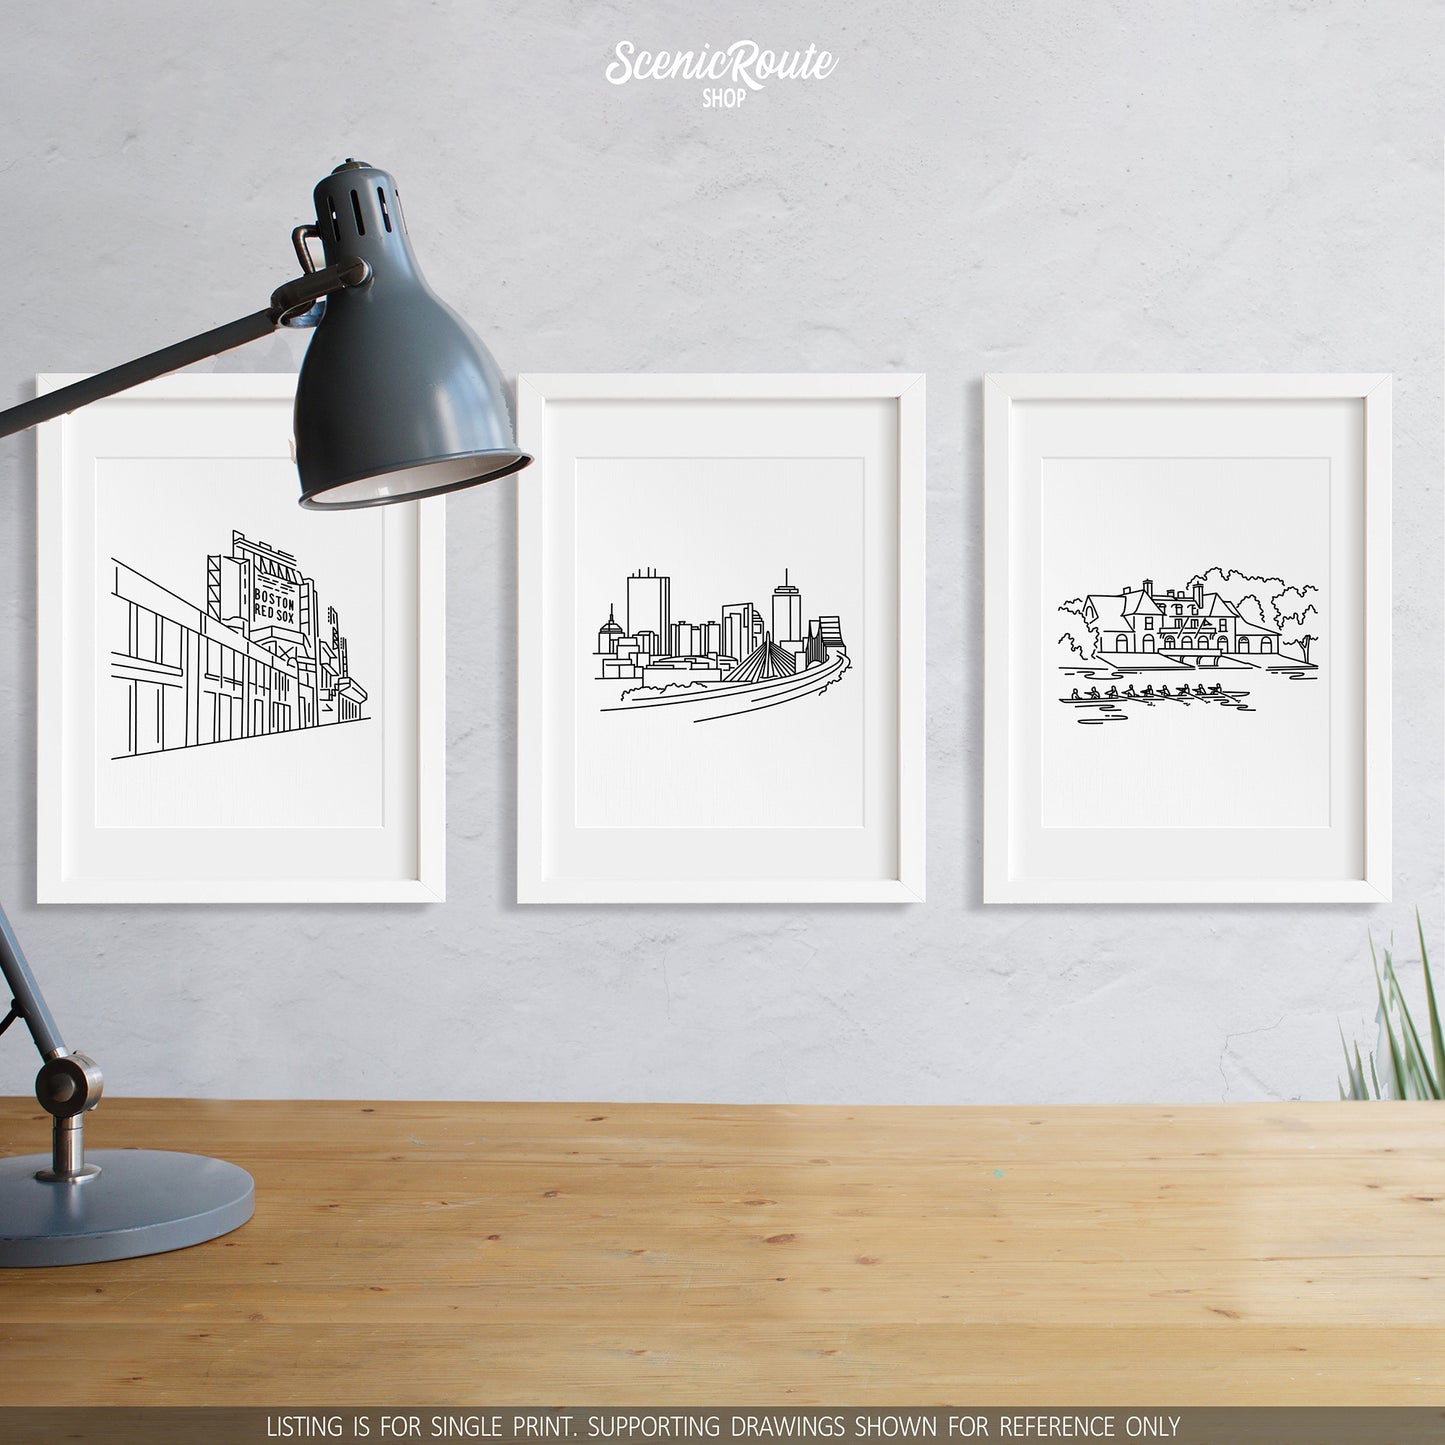 A group of three framed drawings on a wall above a desk with a lamp. The line art drawings include Fenway Park, the Boston Skyline, and the Harvard Boathouse